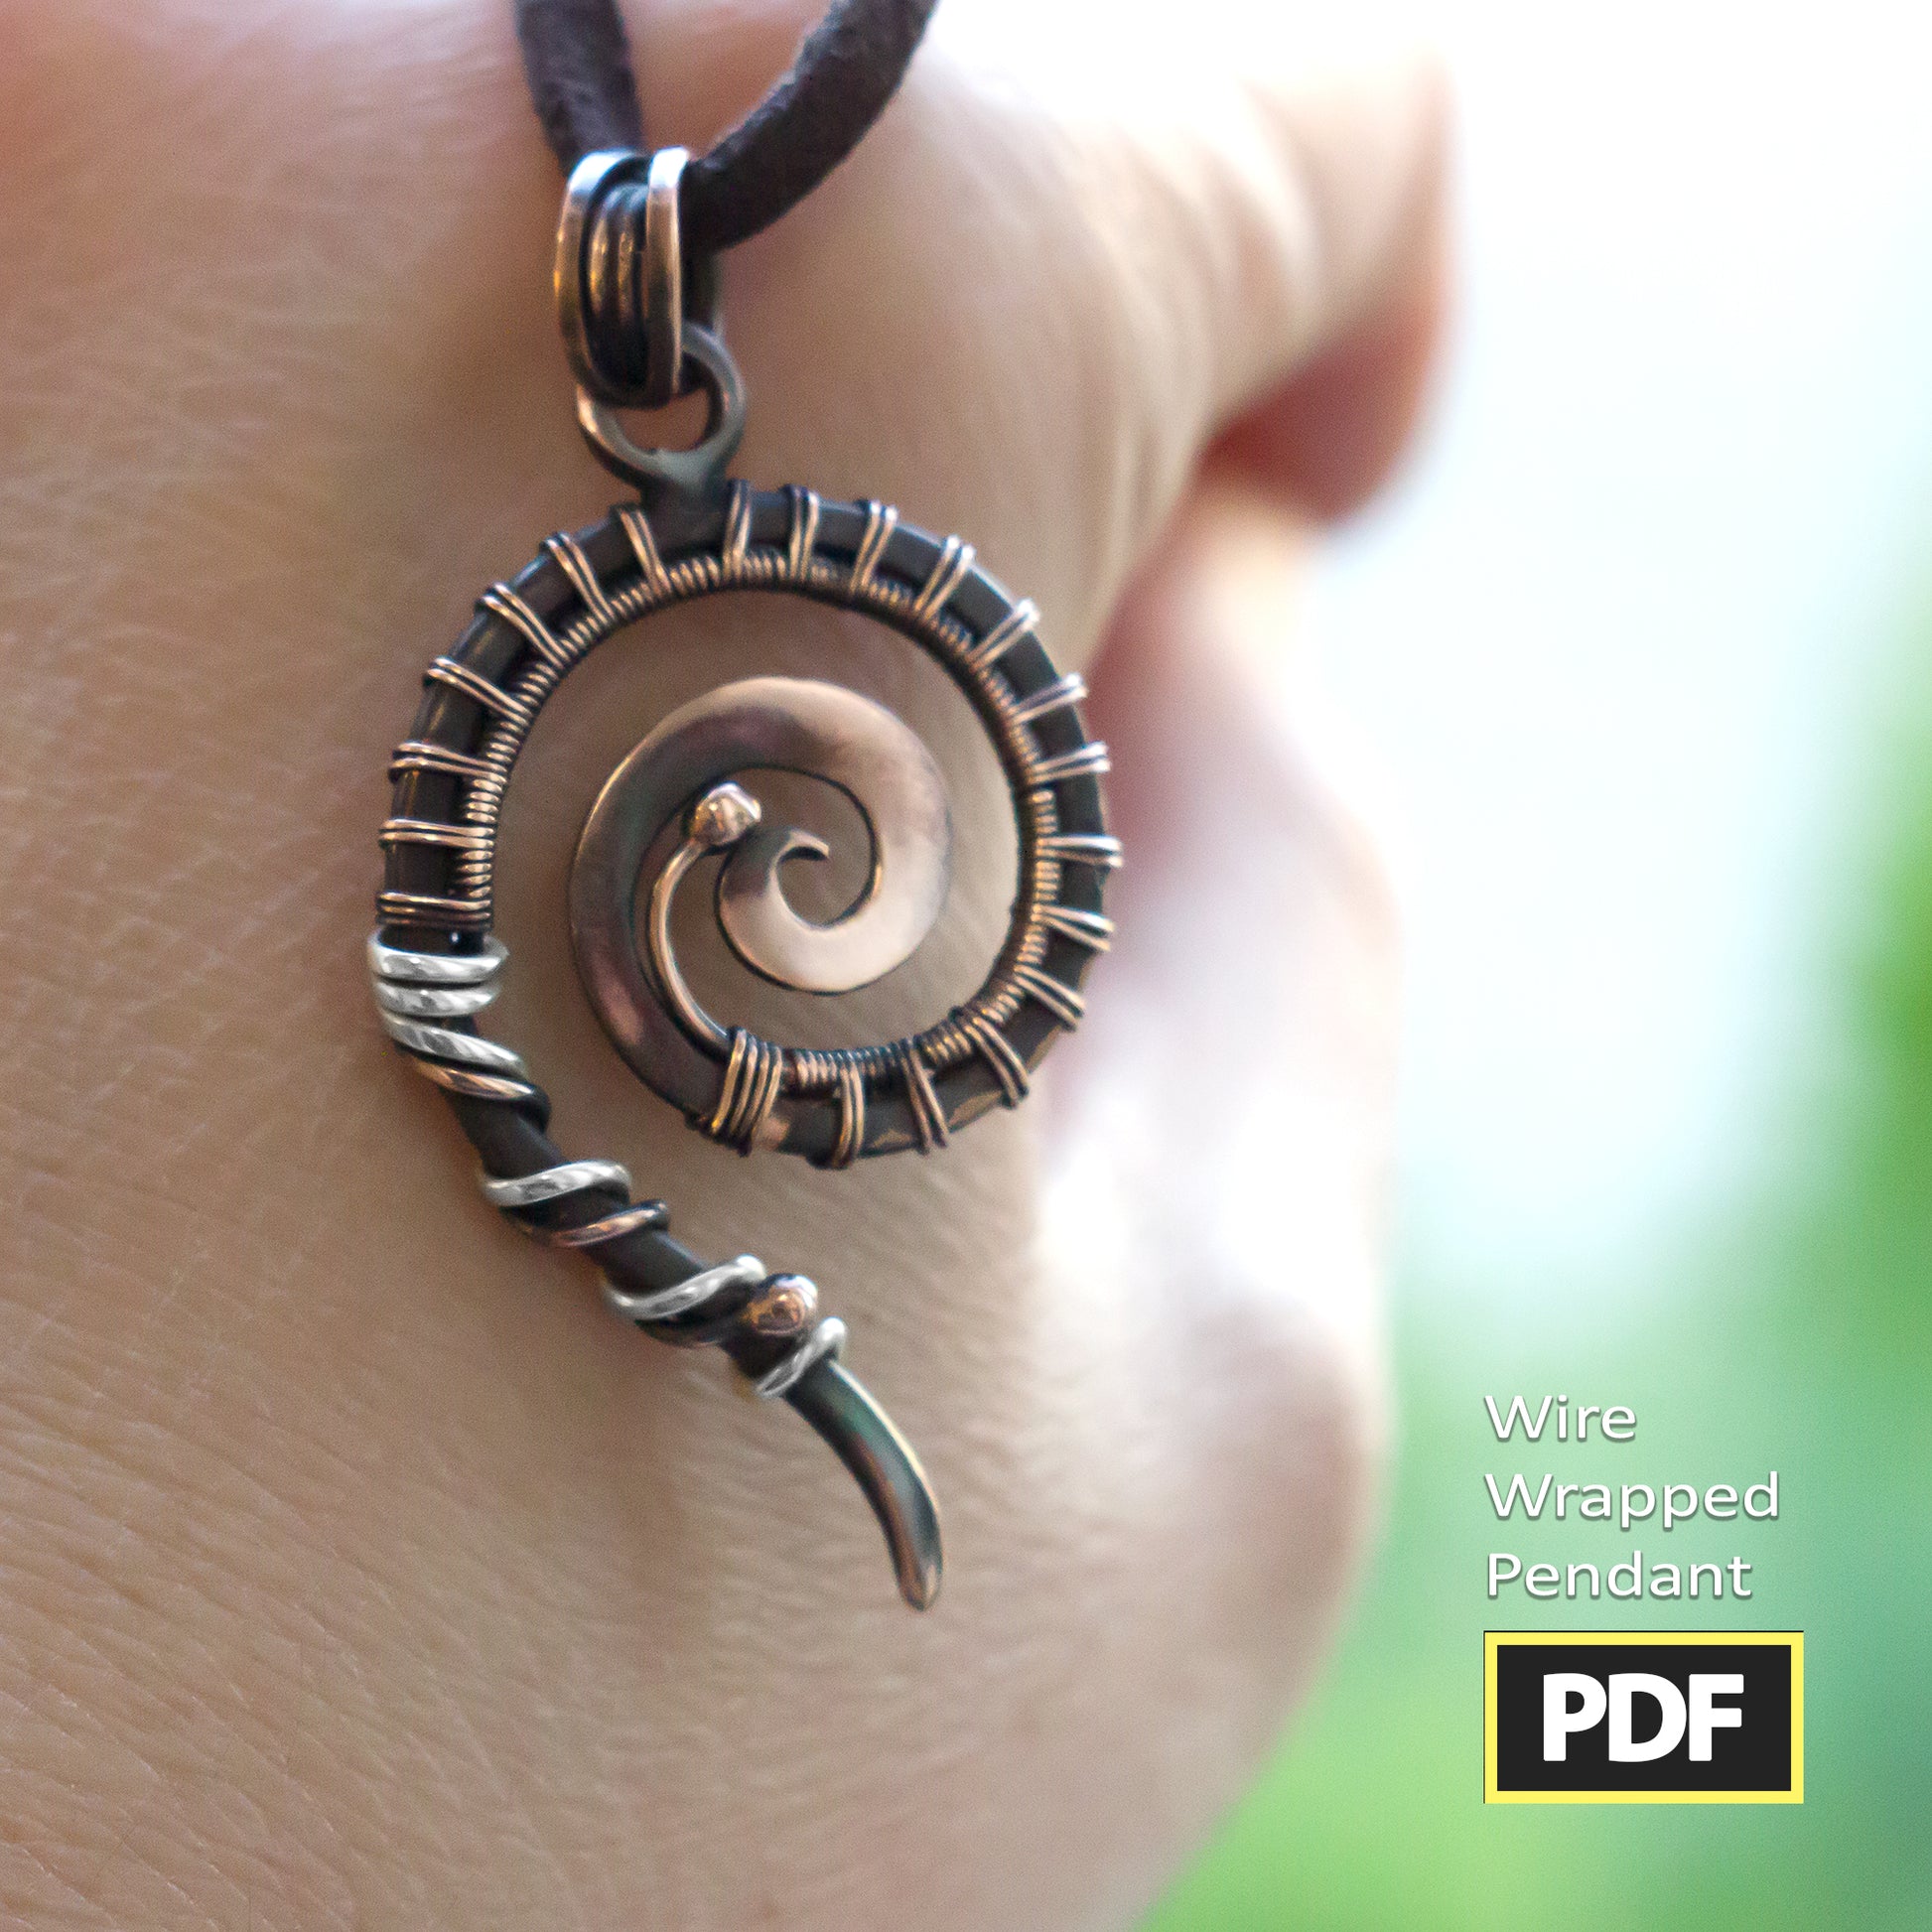 Simple wire wrap spiral PDF pendant tutorial | Wire wrapping diy | Step by step copper wire jewelry making Artarina | See DESCRIPTION BELOW